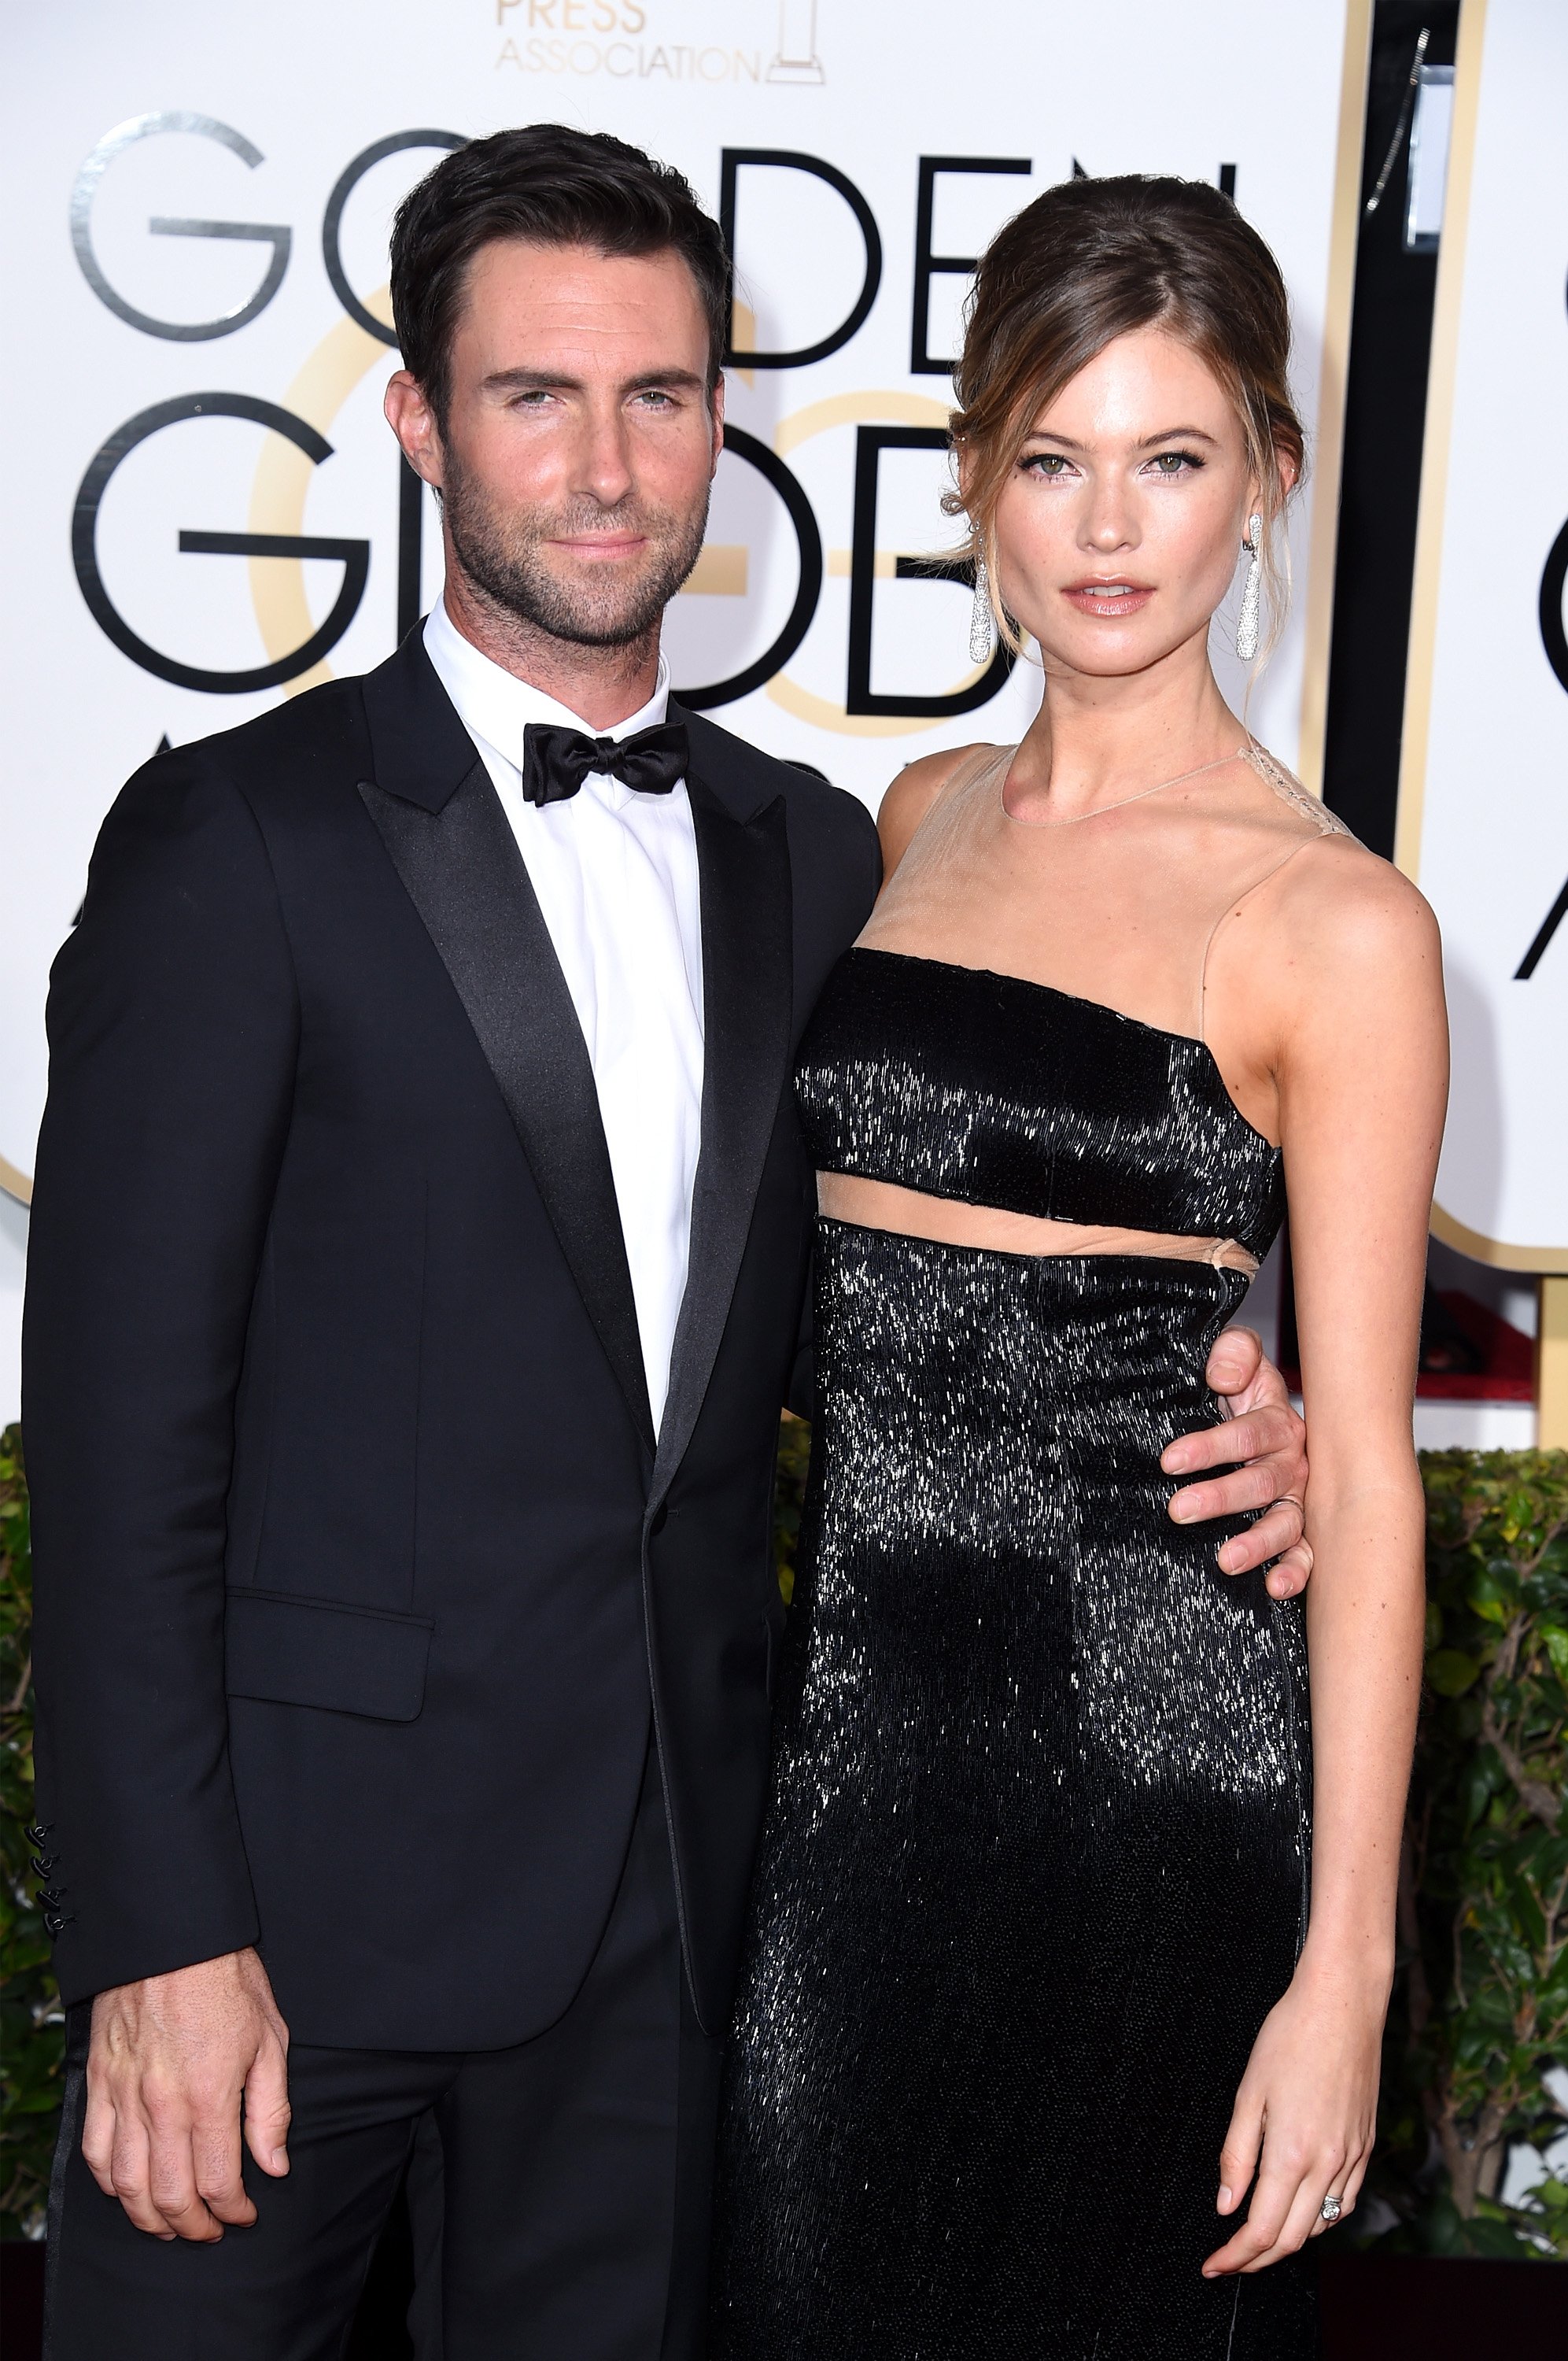 Musician Adam Levine and Behati Prinsloo attend the 72nd Annual Golden Globe Awards at The Beverly Hilton Hotel on January 11, 2015 in Beverly Hills, California | Source: Getty Images